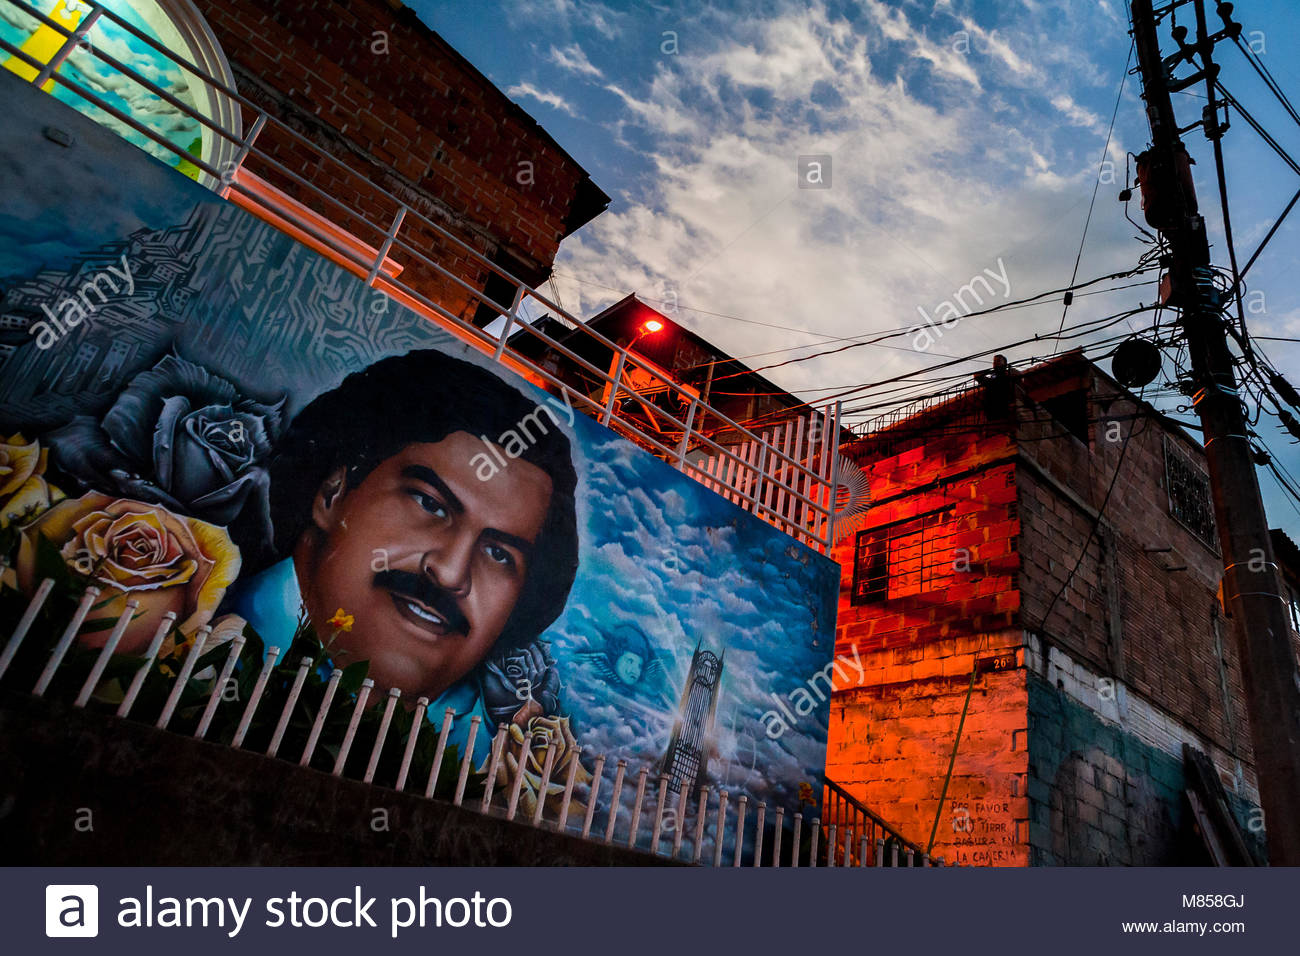 A large mural artwork depicting the lord Pablo Escobar is seen painted on